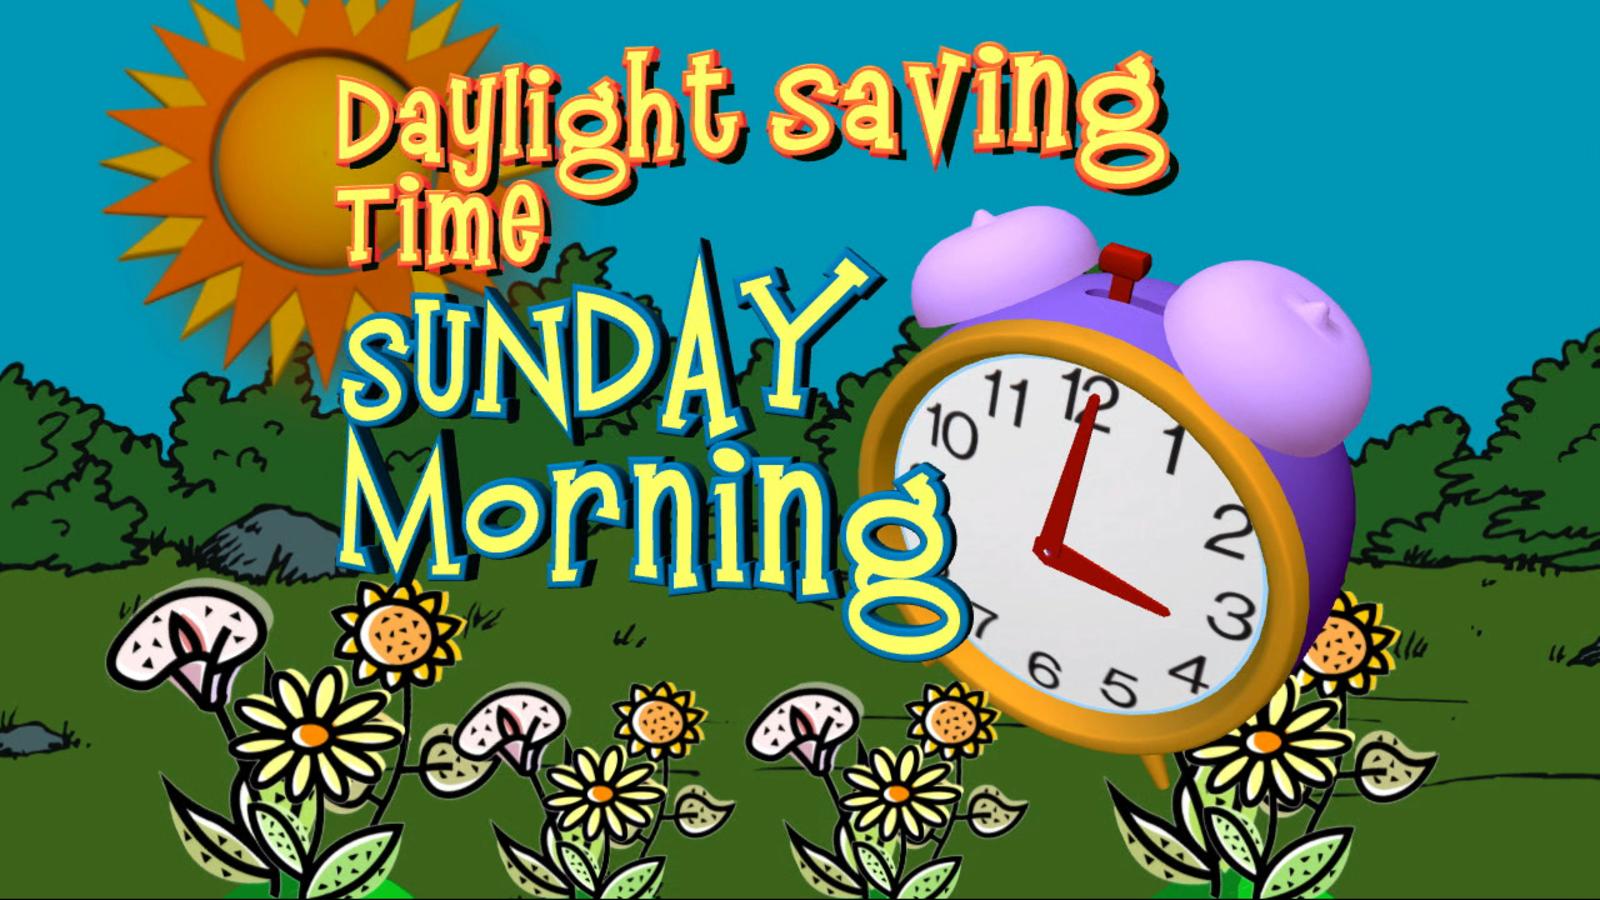 daylight-saving-time-videos-at-abc-news-video-archive-at-abcnews